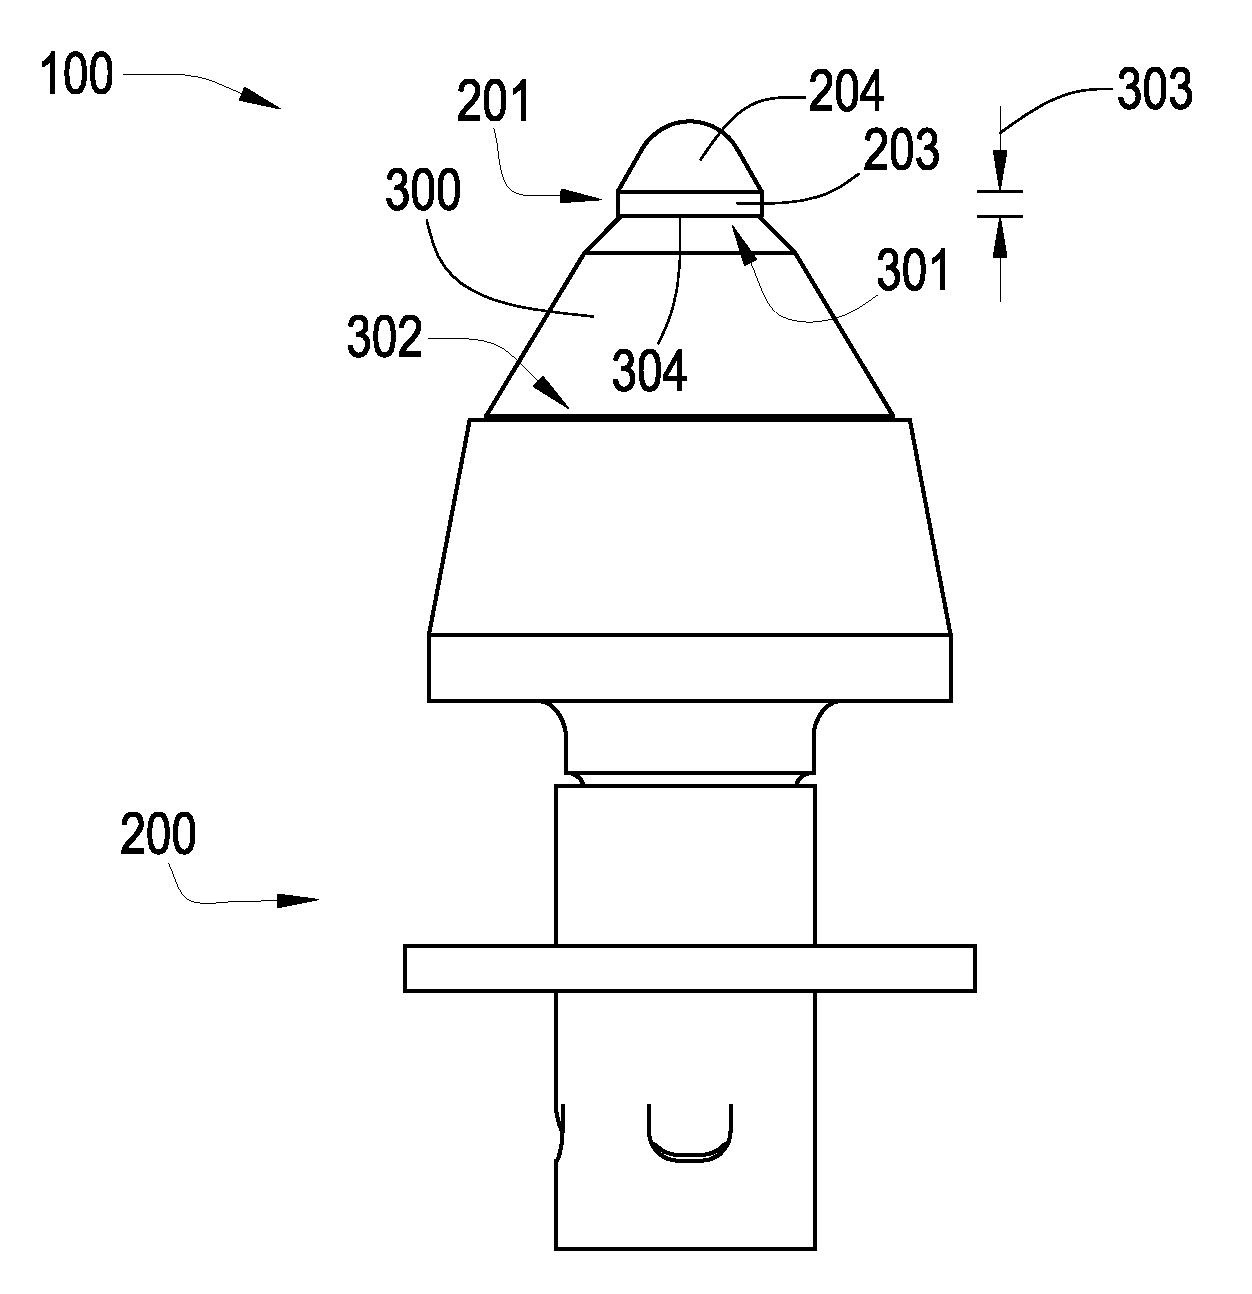 Tool with a large volume of a superhard material